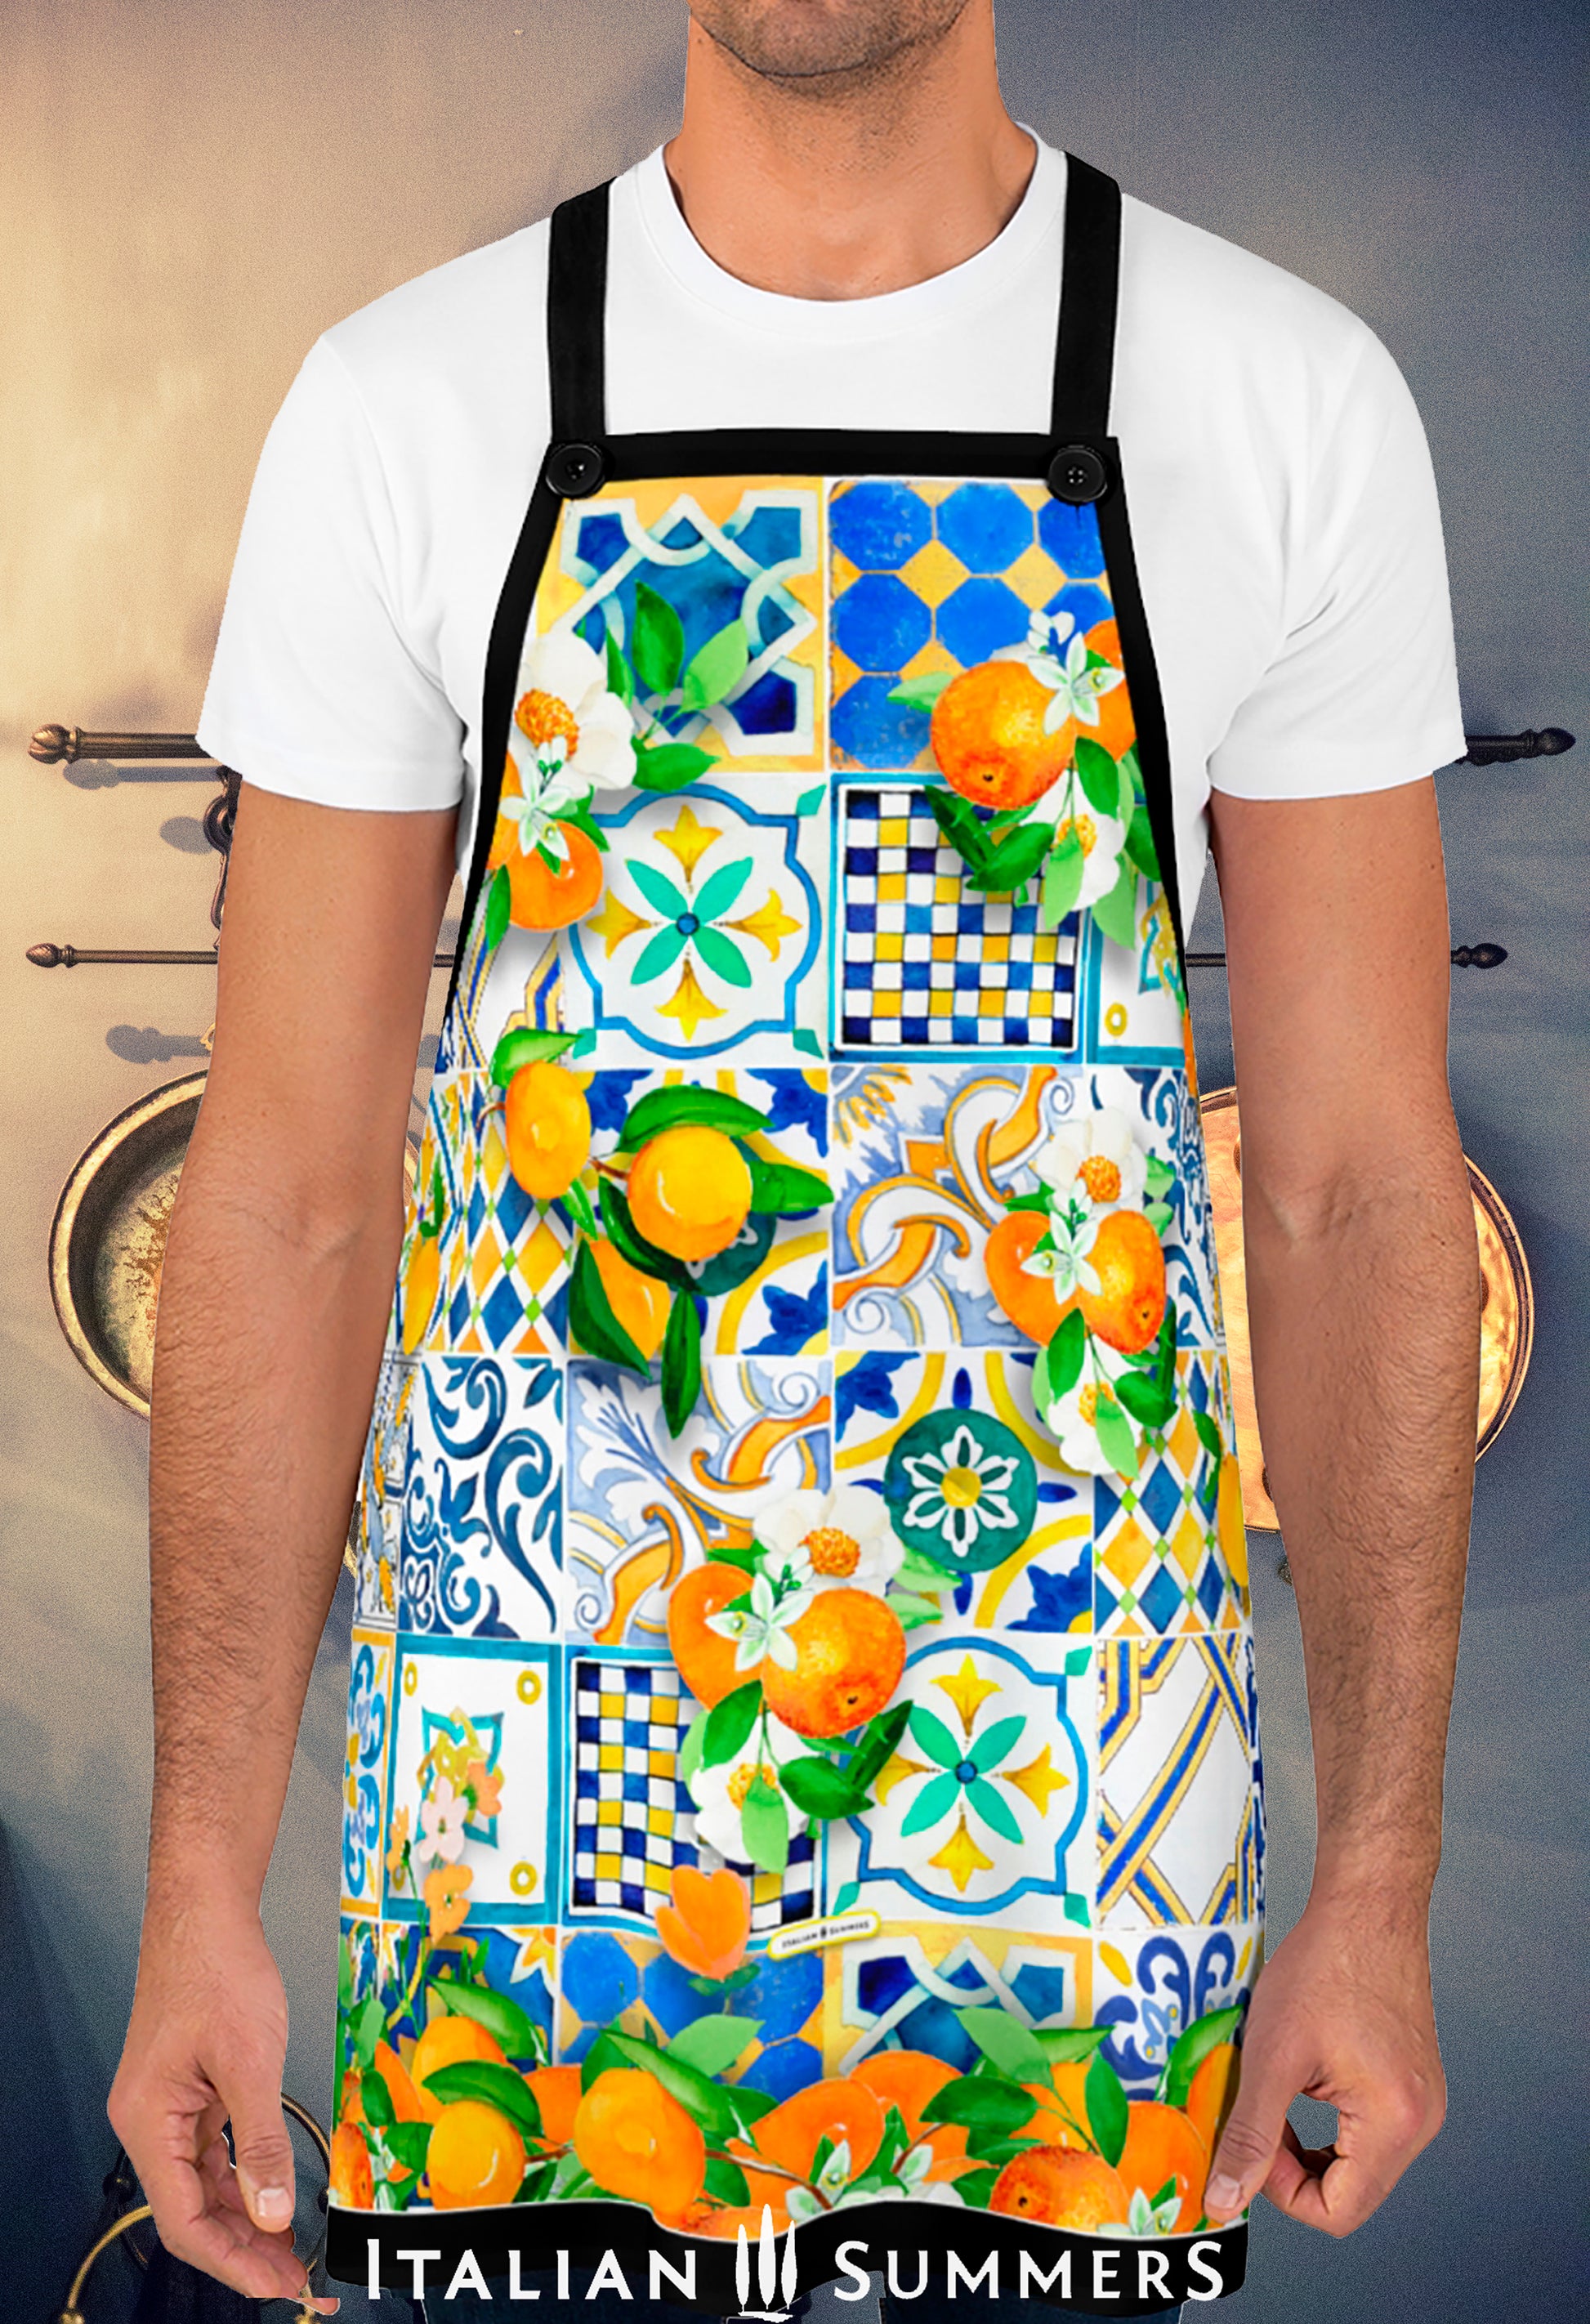 Italy-inspired apron decorated with bright, sunny  and colorful tiles reminiscent of the Amalfi Coast . All decorated with bundles of oranges with blooms.  A must-have for anyone who loves Italy.